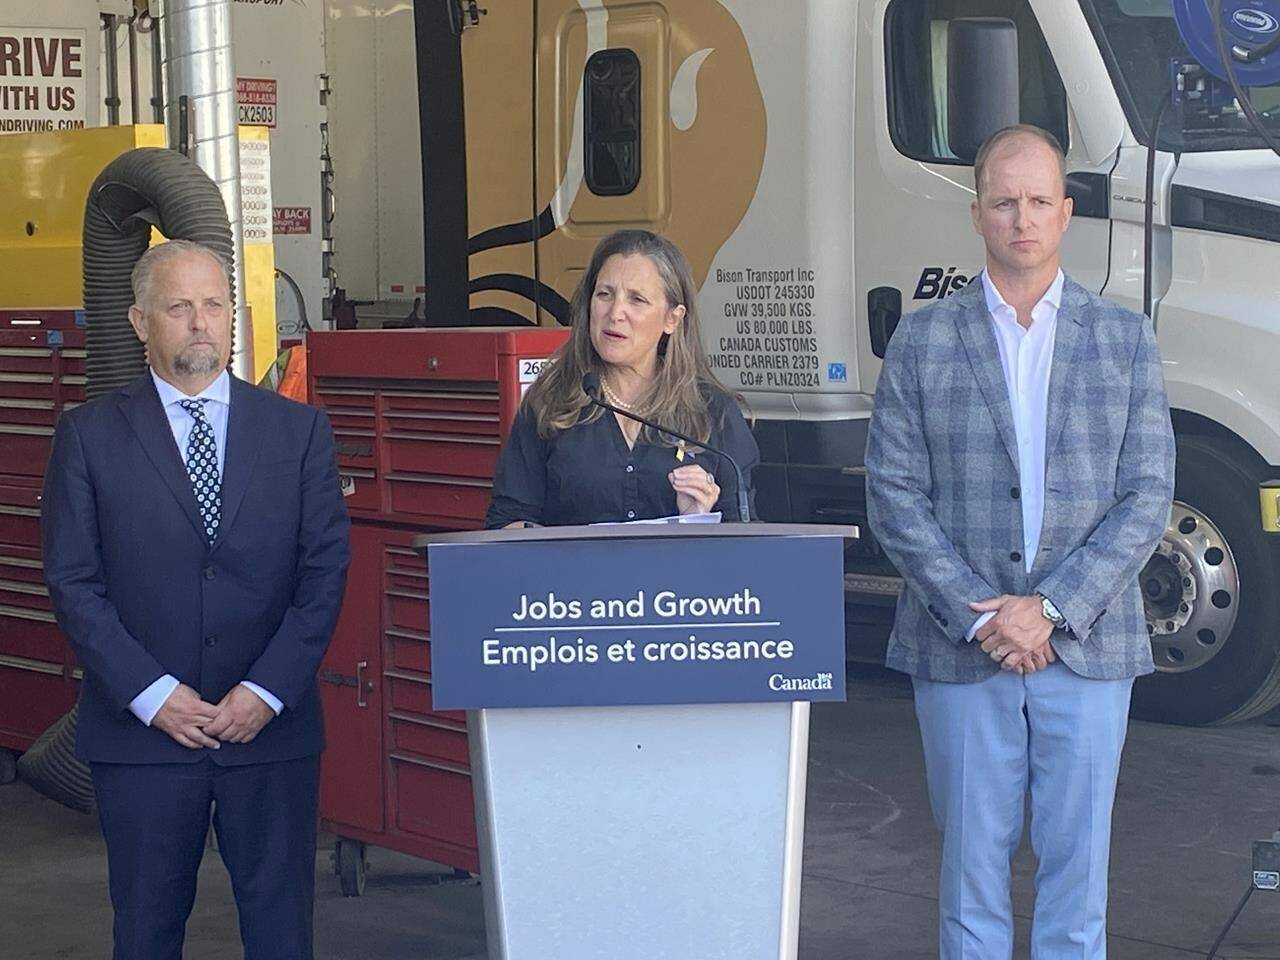 Finance Minister and Deputy Prime Minster Chrystia Freeland speaks in Calgary, Wednesday, Aug. 31, 2022, flanked by Steven Laskowski (left), president of Canadian Trucking Alliance and Trevor Fridfinnson (right), chief operating officer at Bison Transport. THE CANADIAN PRESS/Bill Graveland